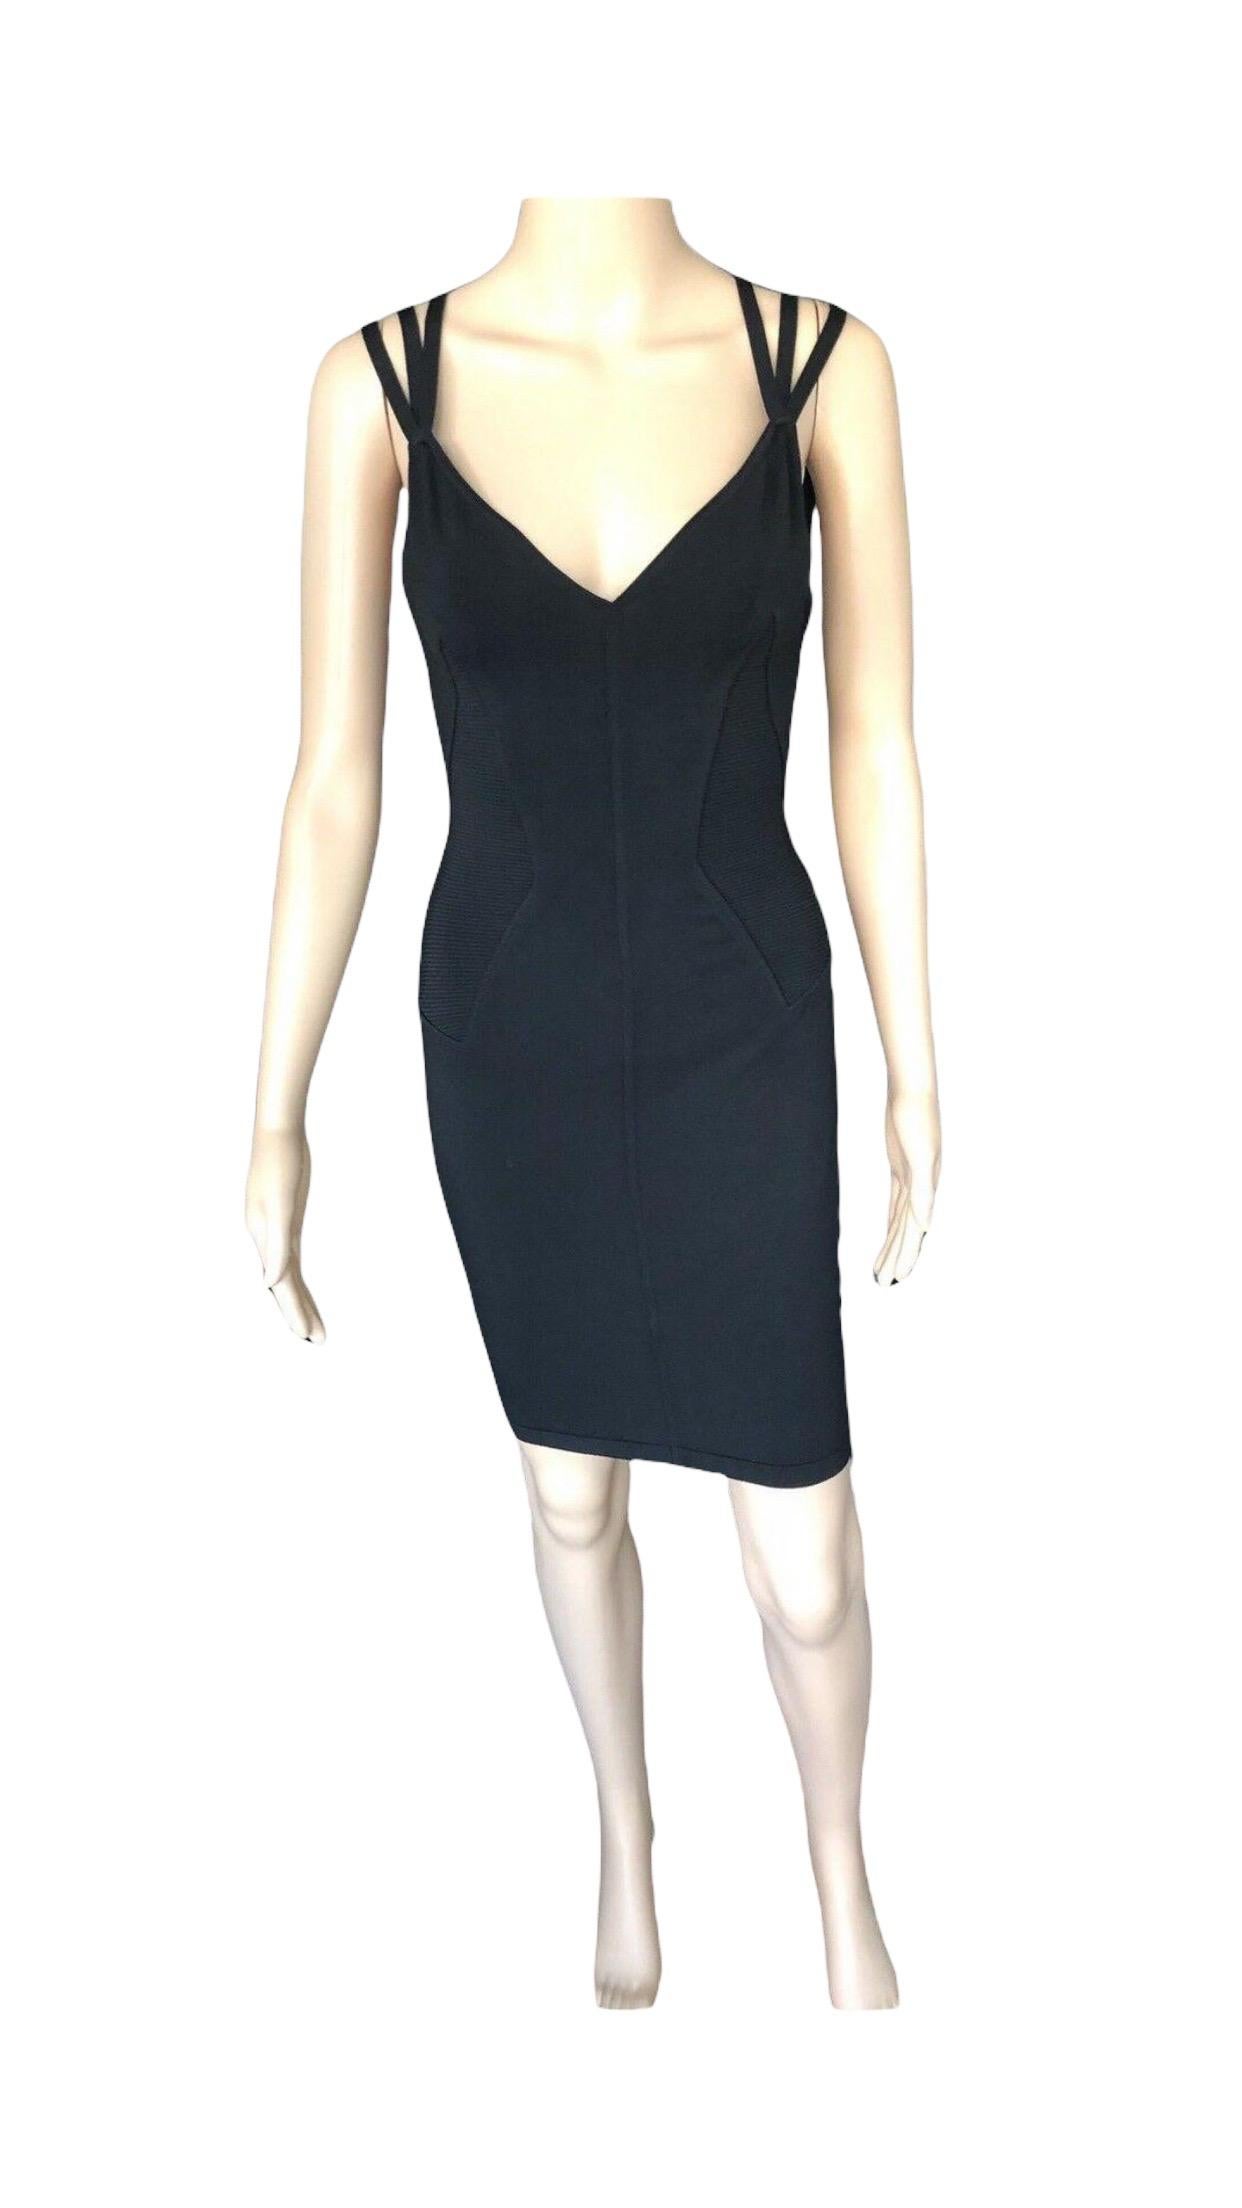 Azzedine Alaia S/S 1990 Vintage Black Bustier Fitted Dress  For Sale 1